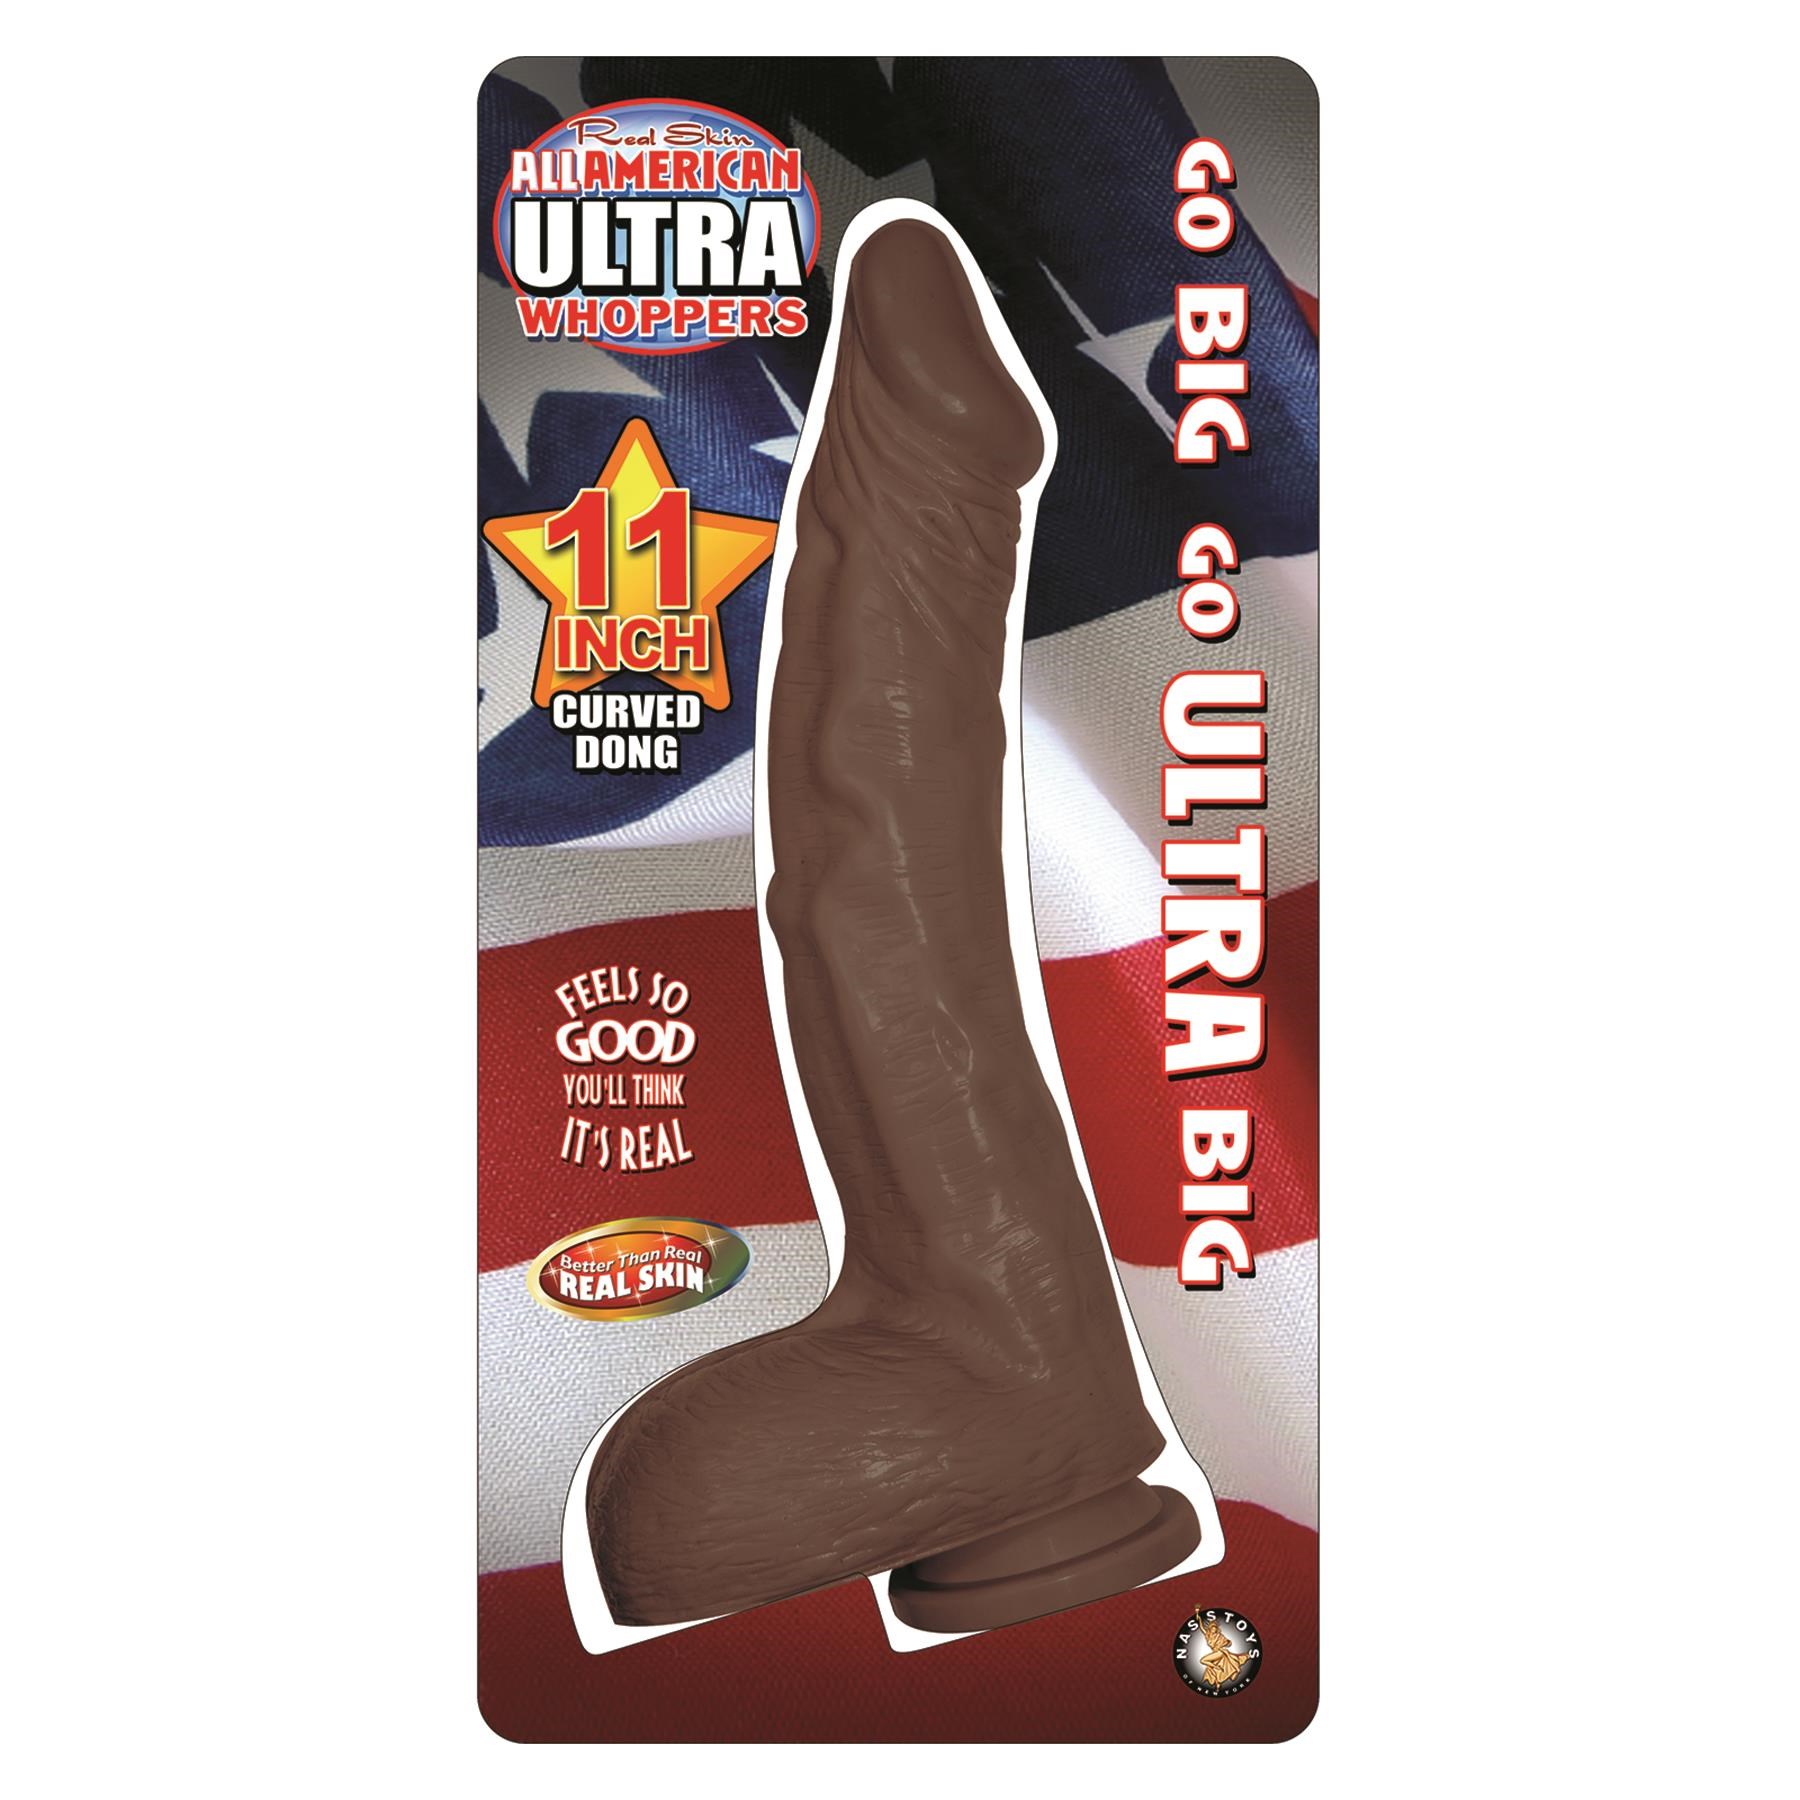 All American Ultra Whopper 11 Inch Curved Dong Package Shot - Brown